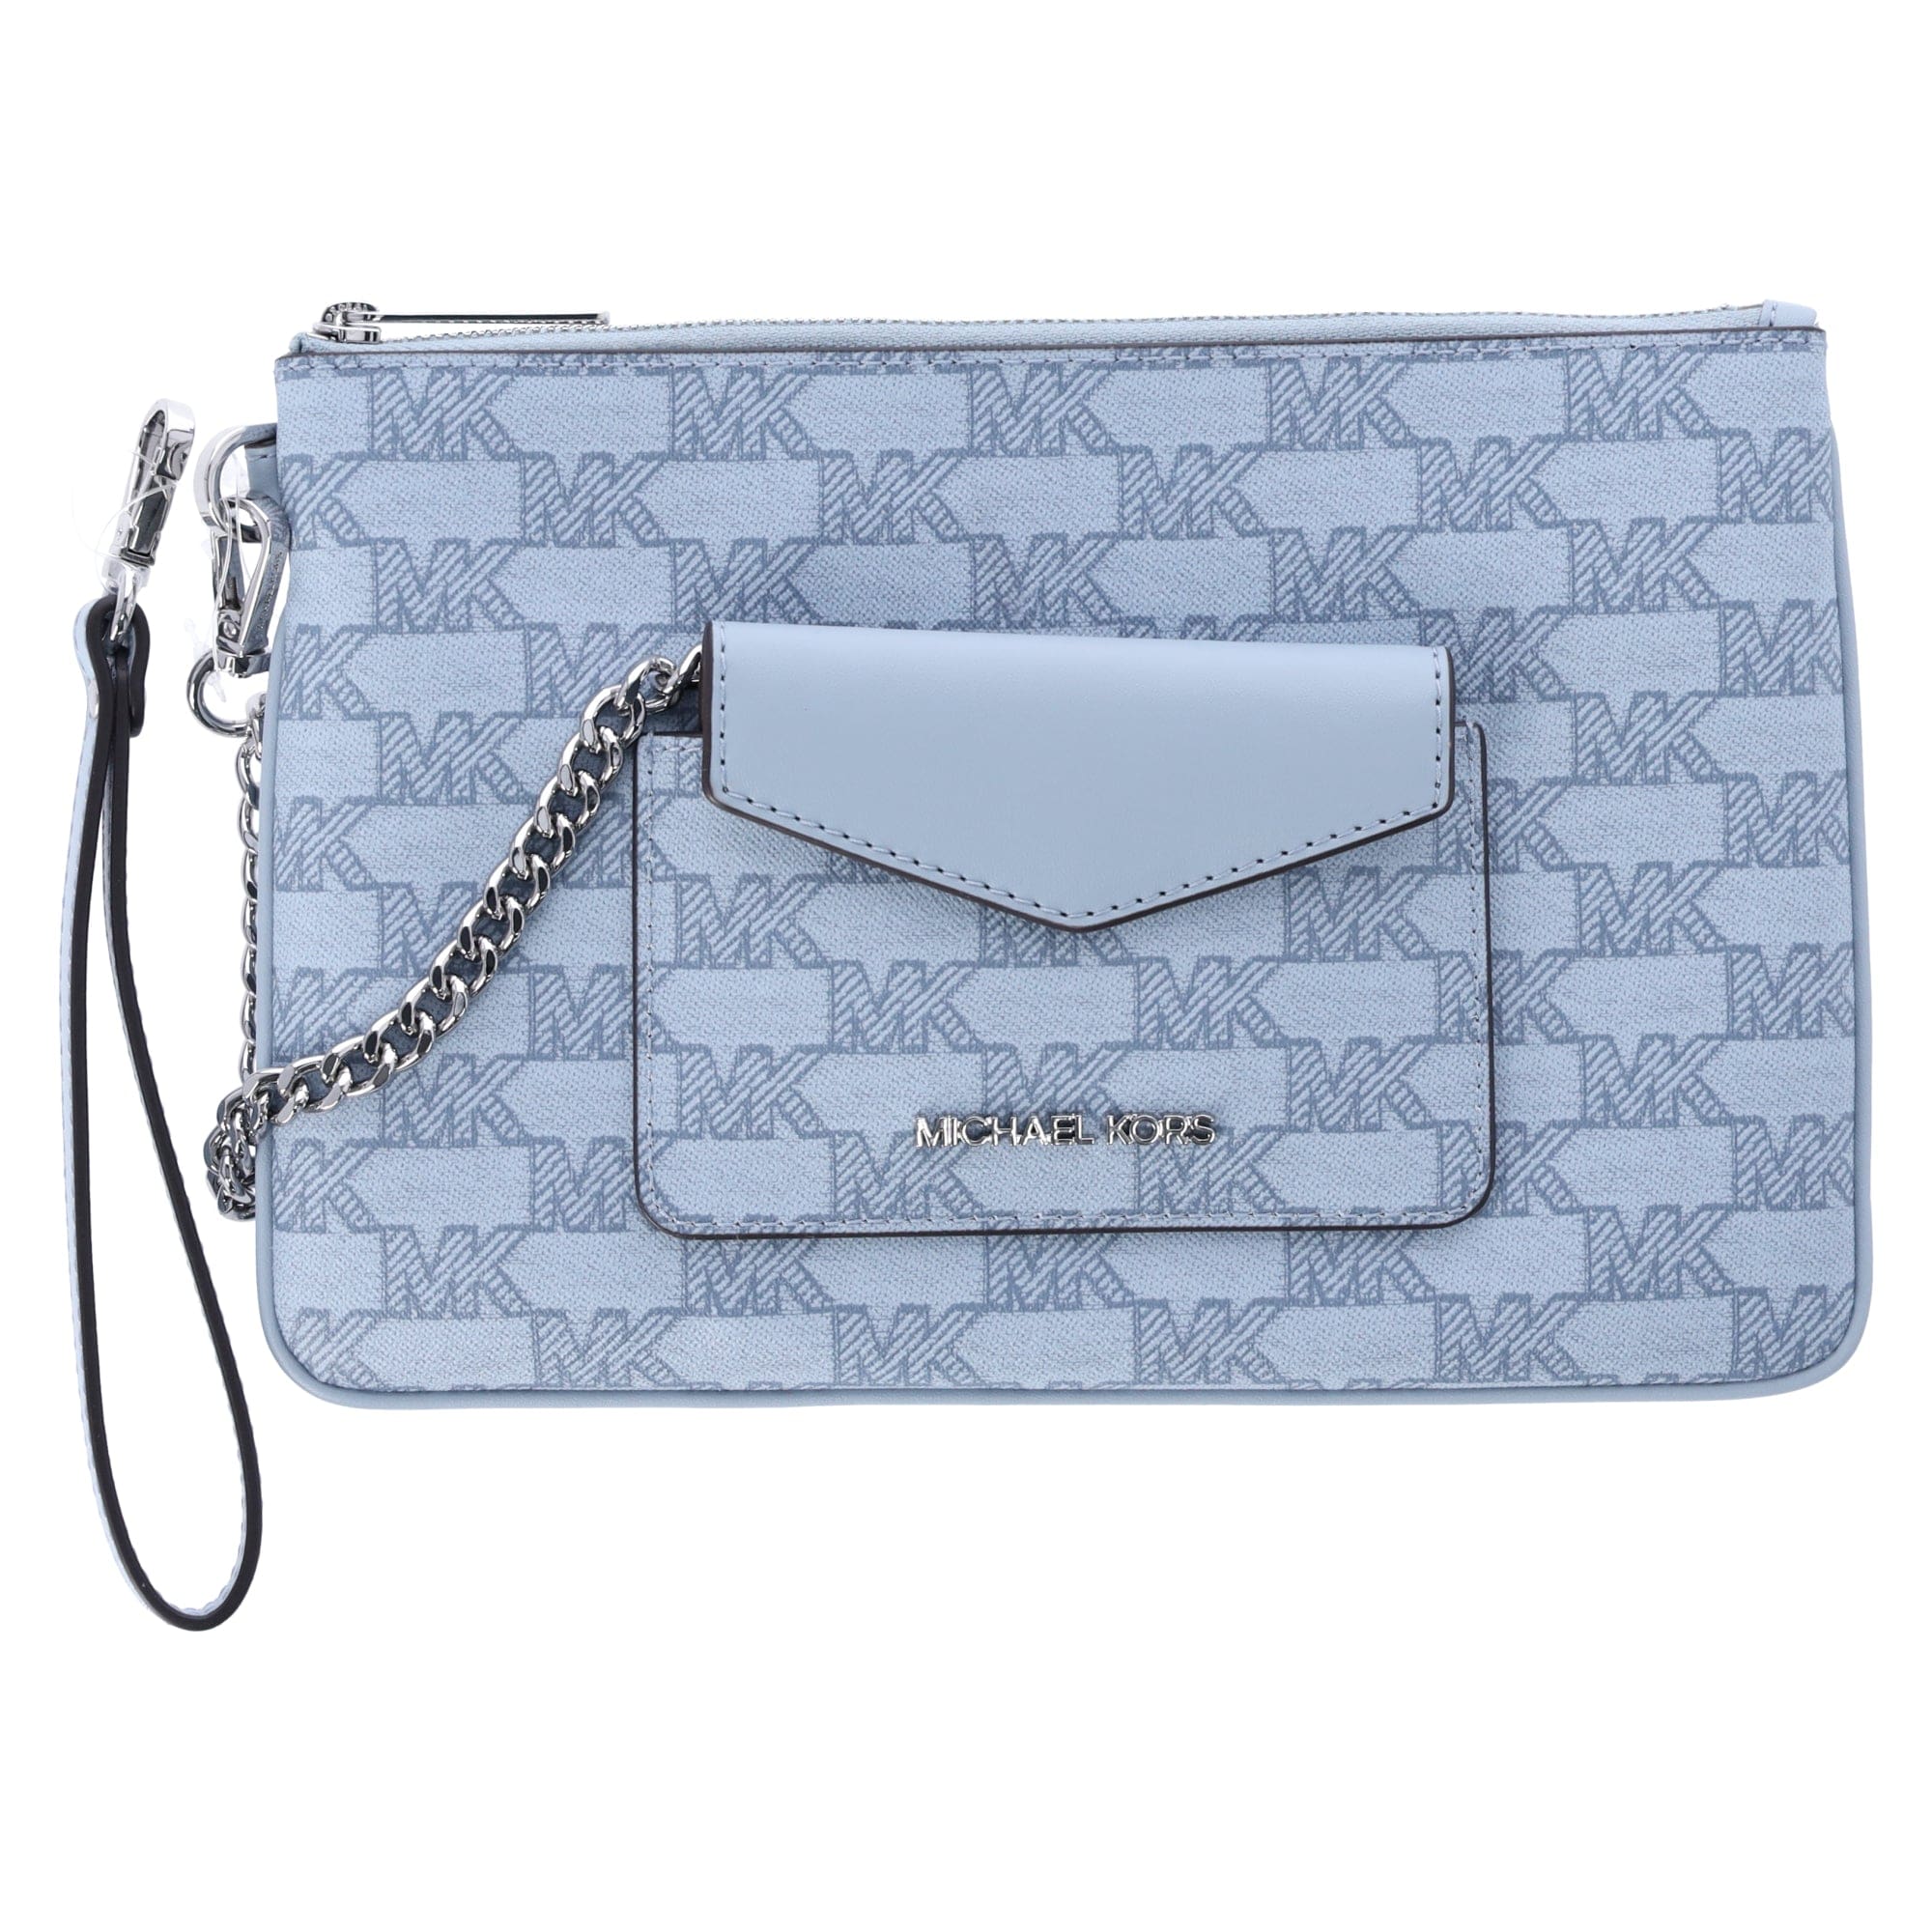 Michael Kors Large Bright Blue & White Jet Set Bag + Wristlet in Saffiano  Leather - Earth Luxury